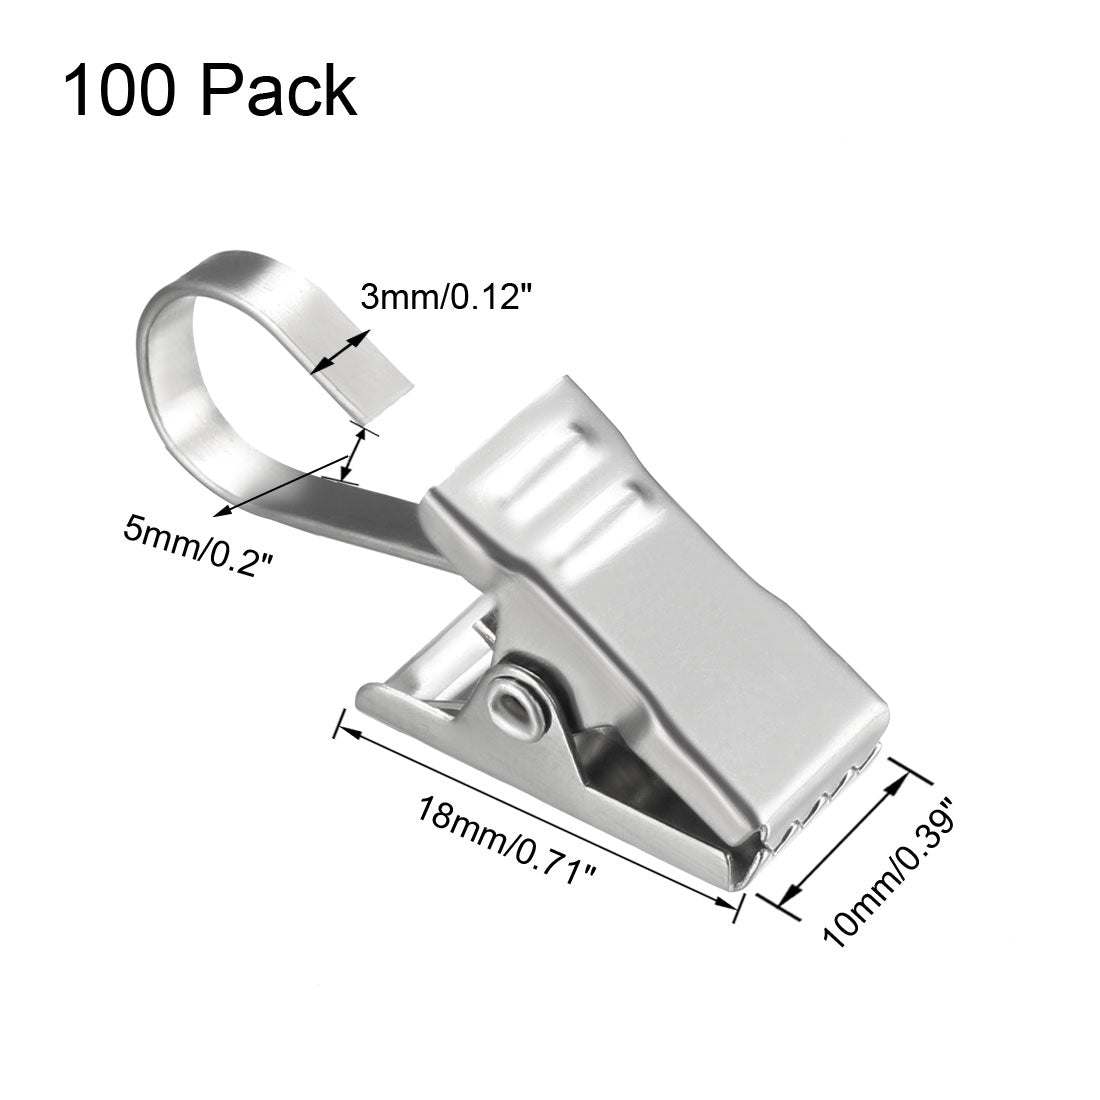 uxcell Uxcell Curtain Clip Hook Set Clips for Curtain Photos Home Decoration Art Craft Display 0.71"*0.39" Silver Tone 100pcs